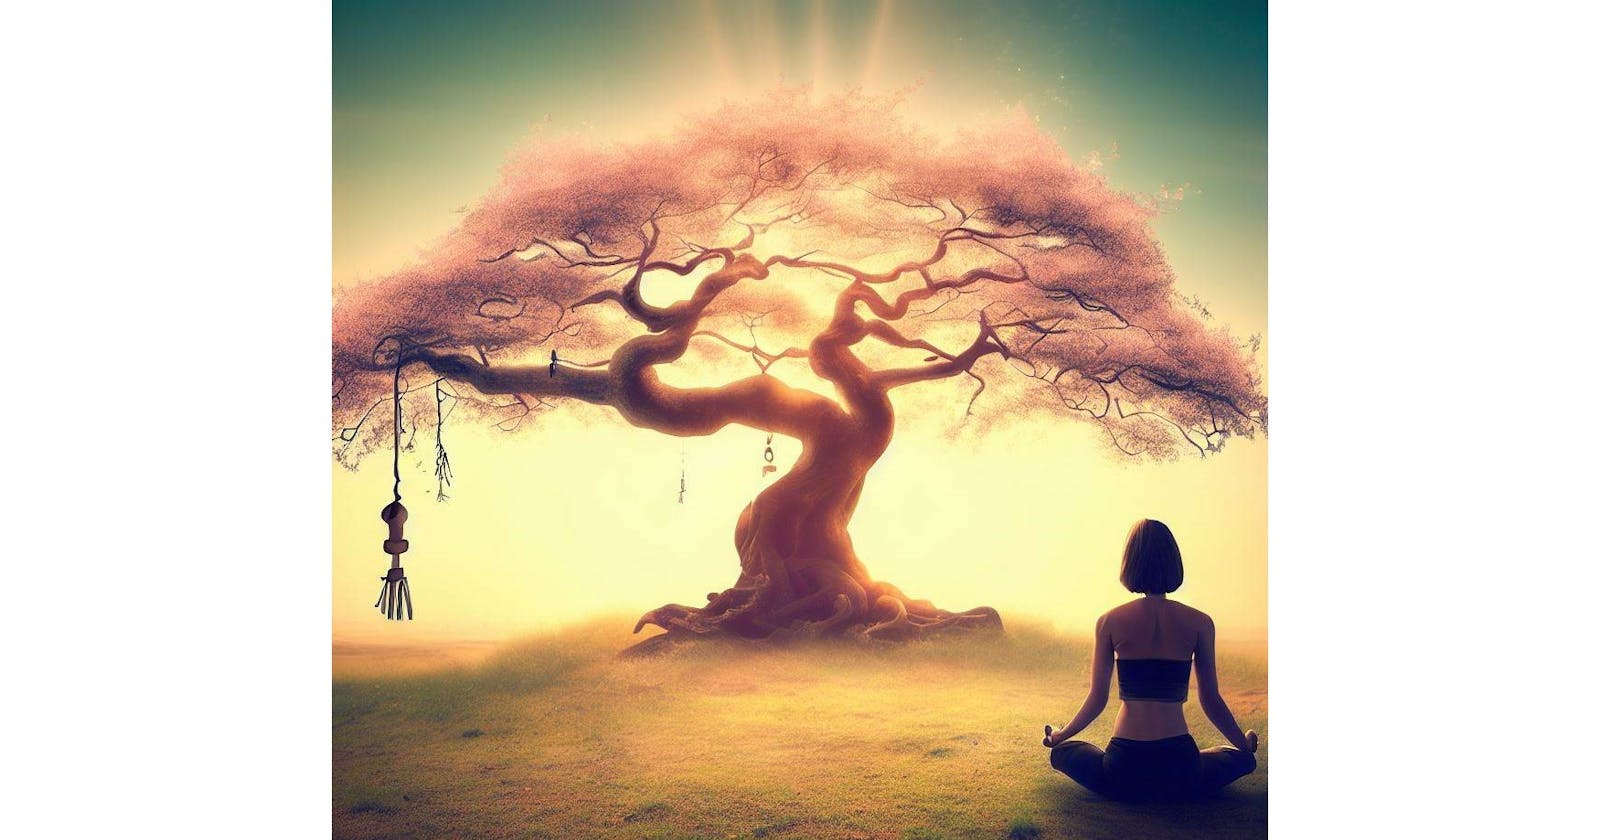 How to Use a Wishing Tree for Your Yoga Practice